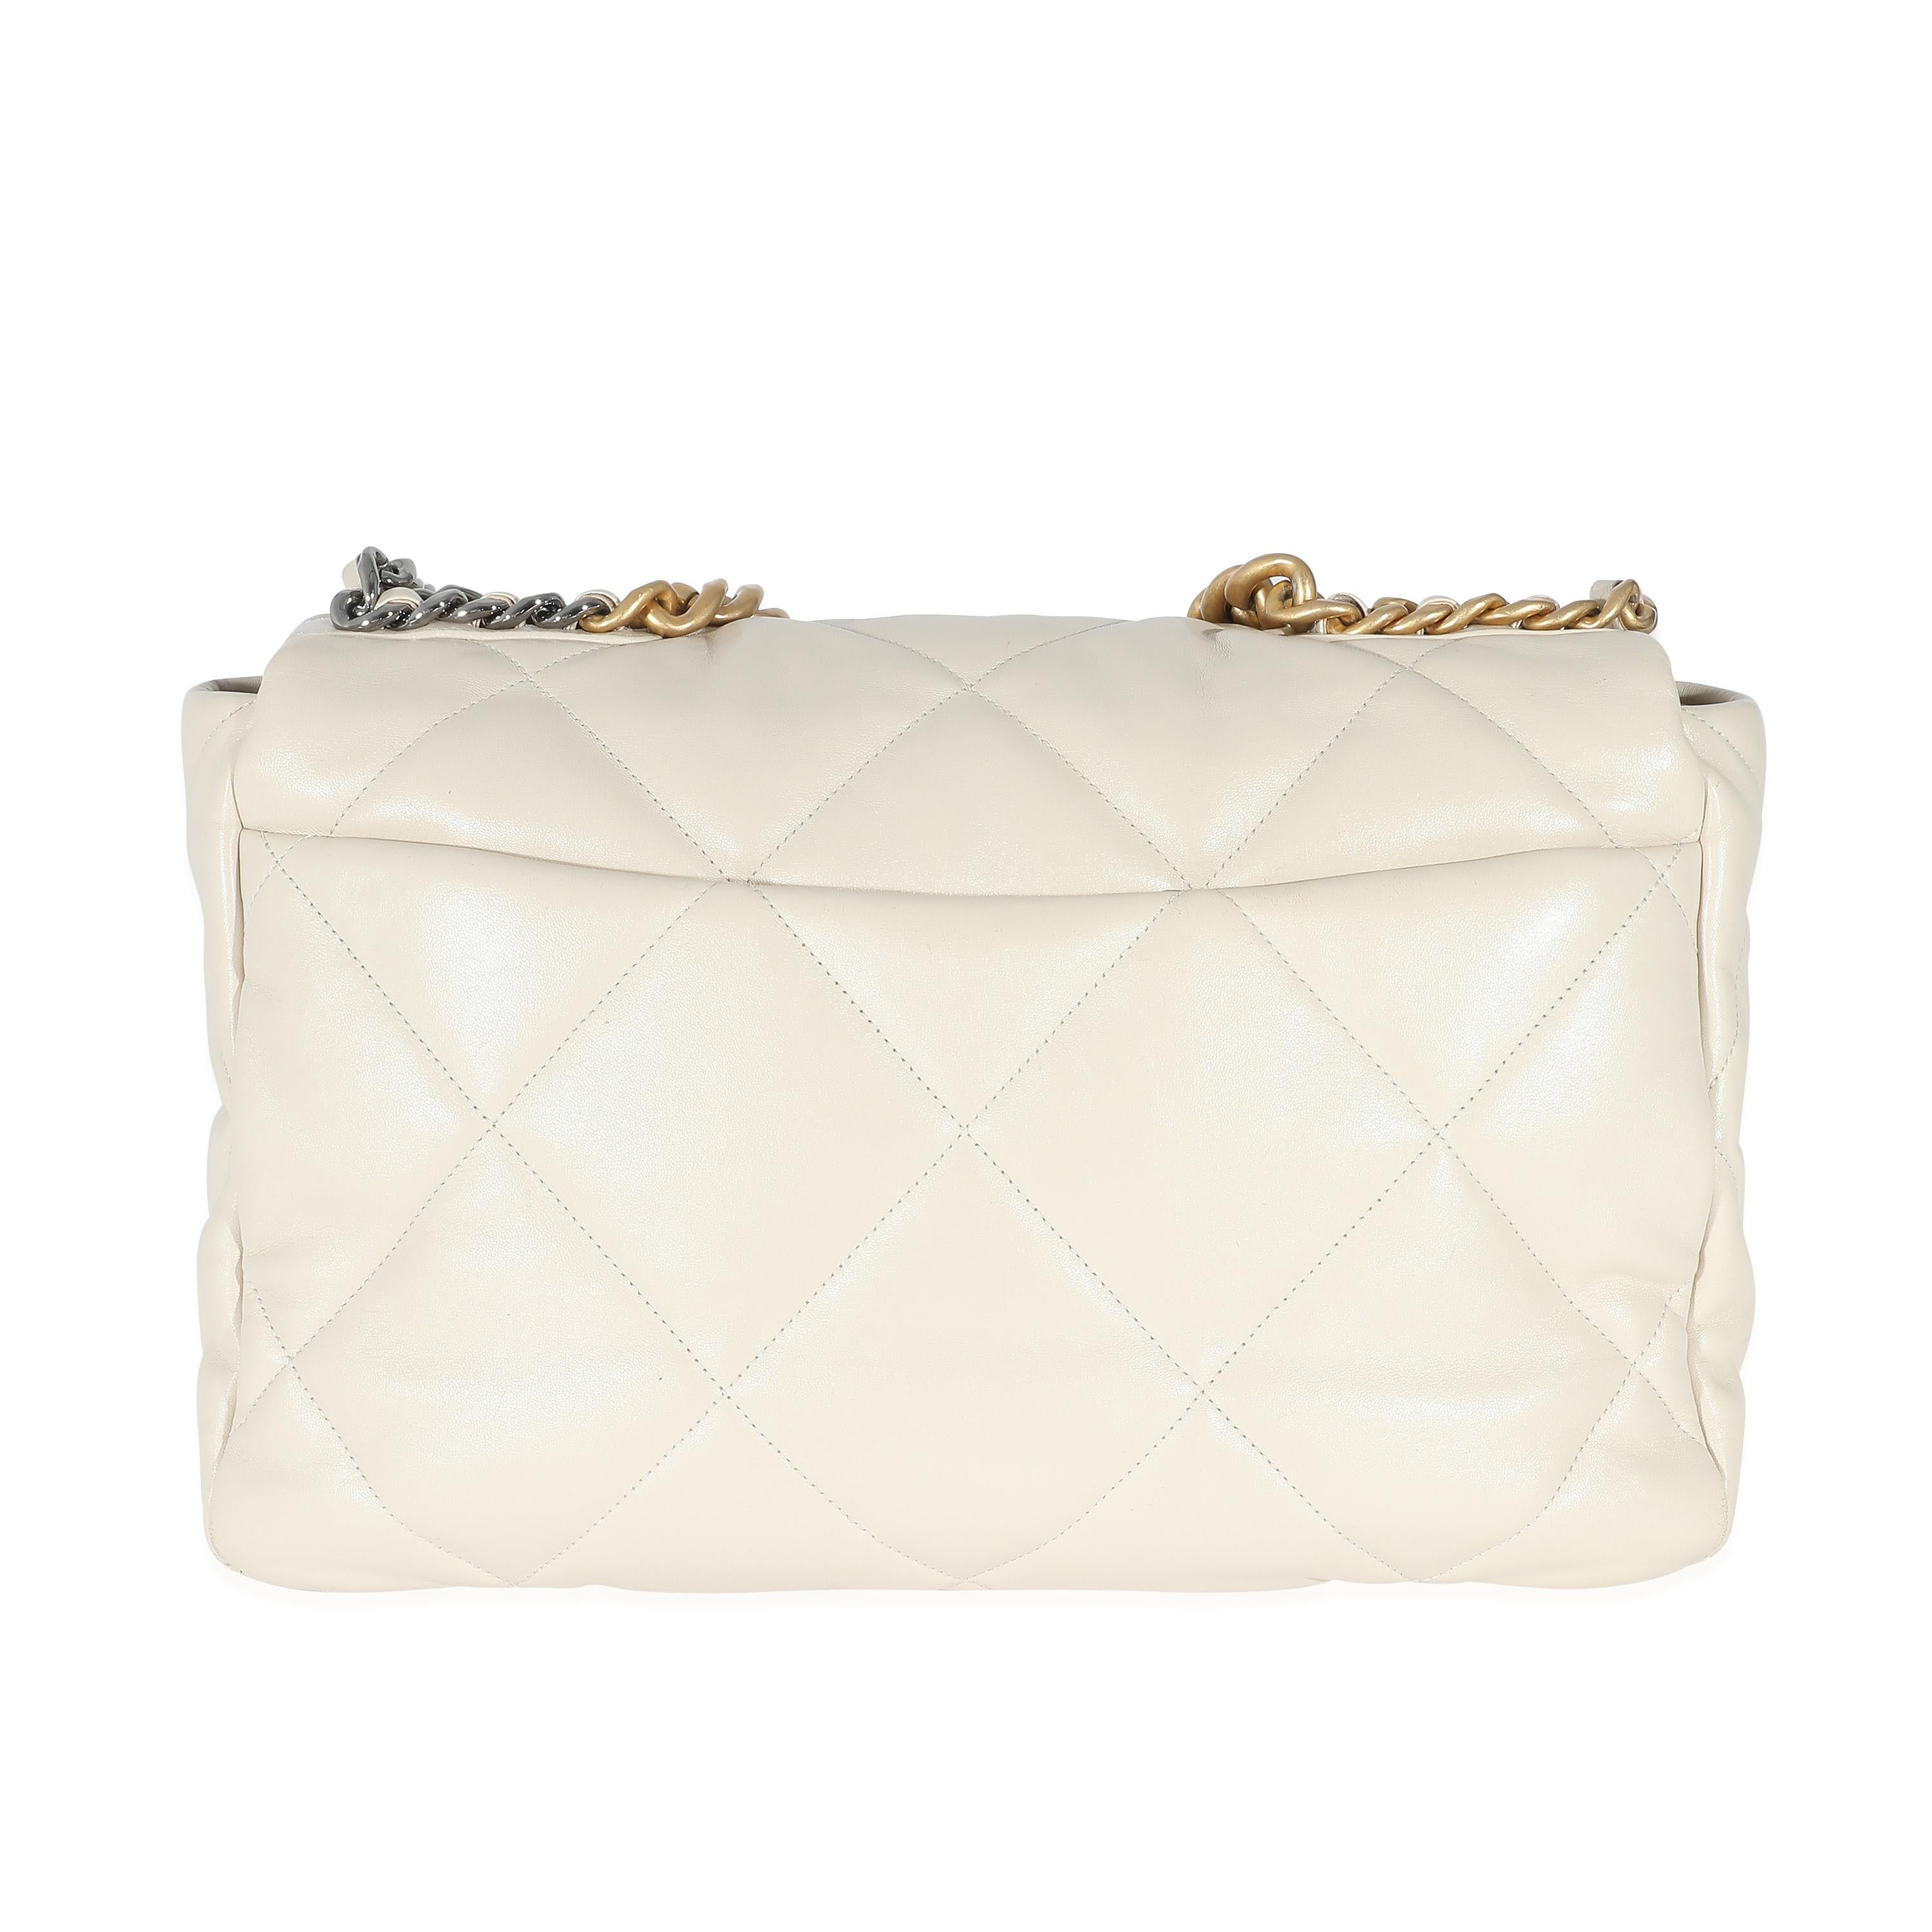 Beige Chanel Ivory Shiny Quilted Lambskin Maxi Chanel 19 Flap Bag For Sale